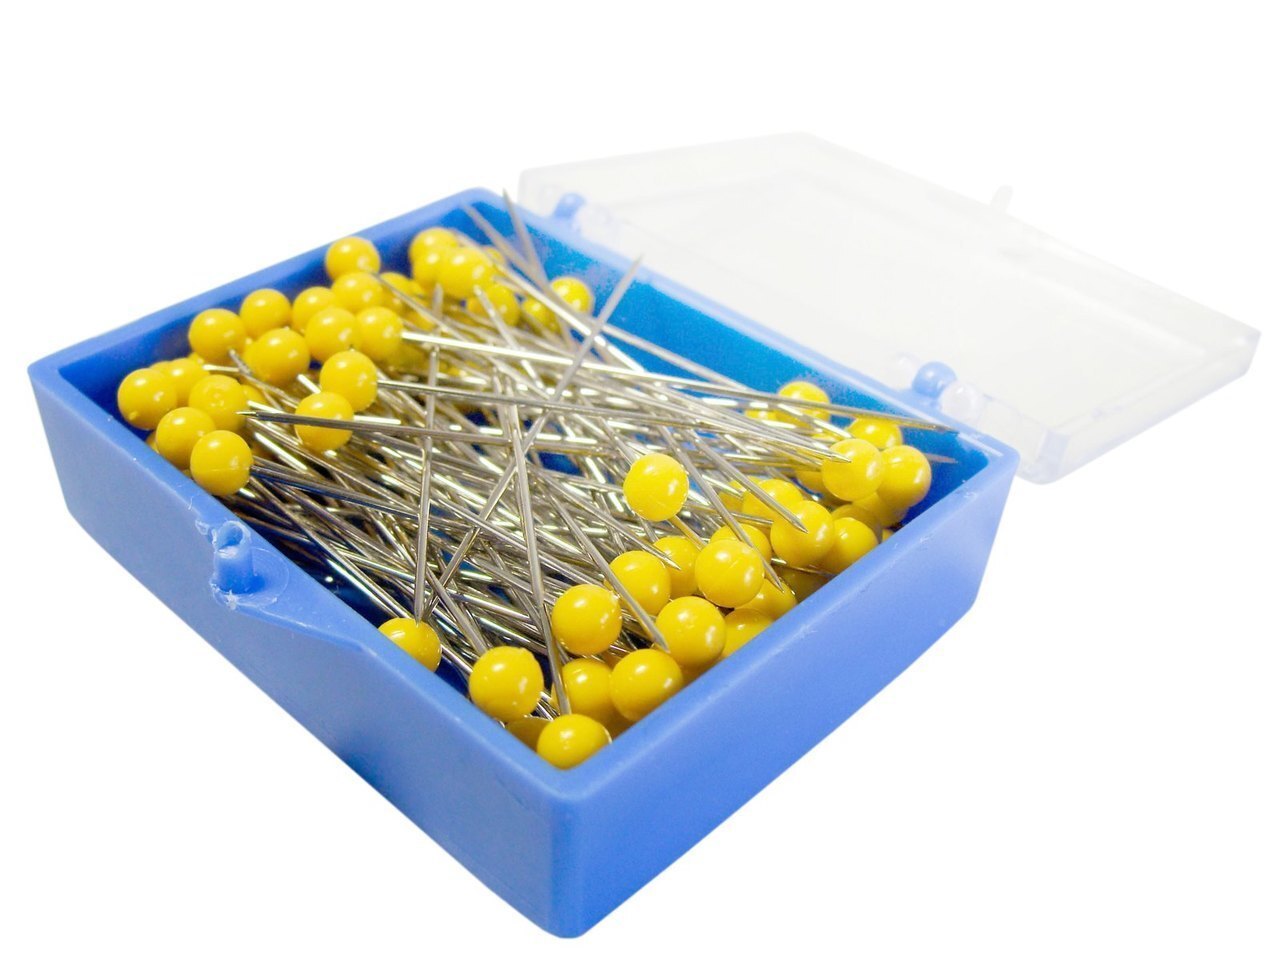 Mr. Pen- Sewing Pins, 300 pcs, Sewing Pins with Colored Heads, Pins,  Quilting Pins - Mr. Pen Store